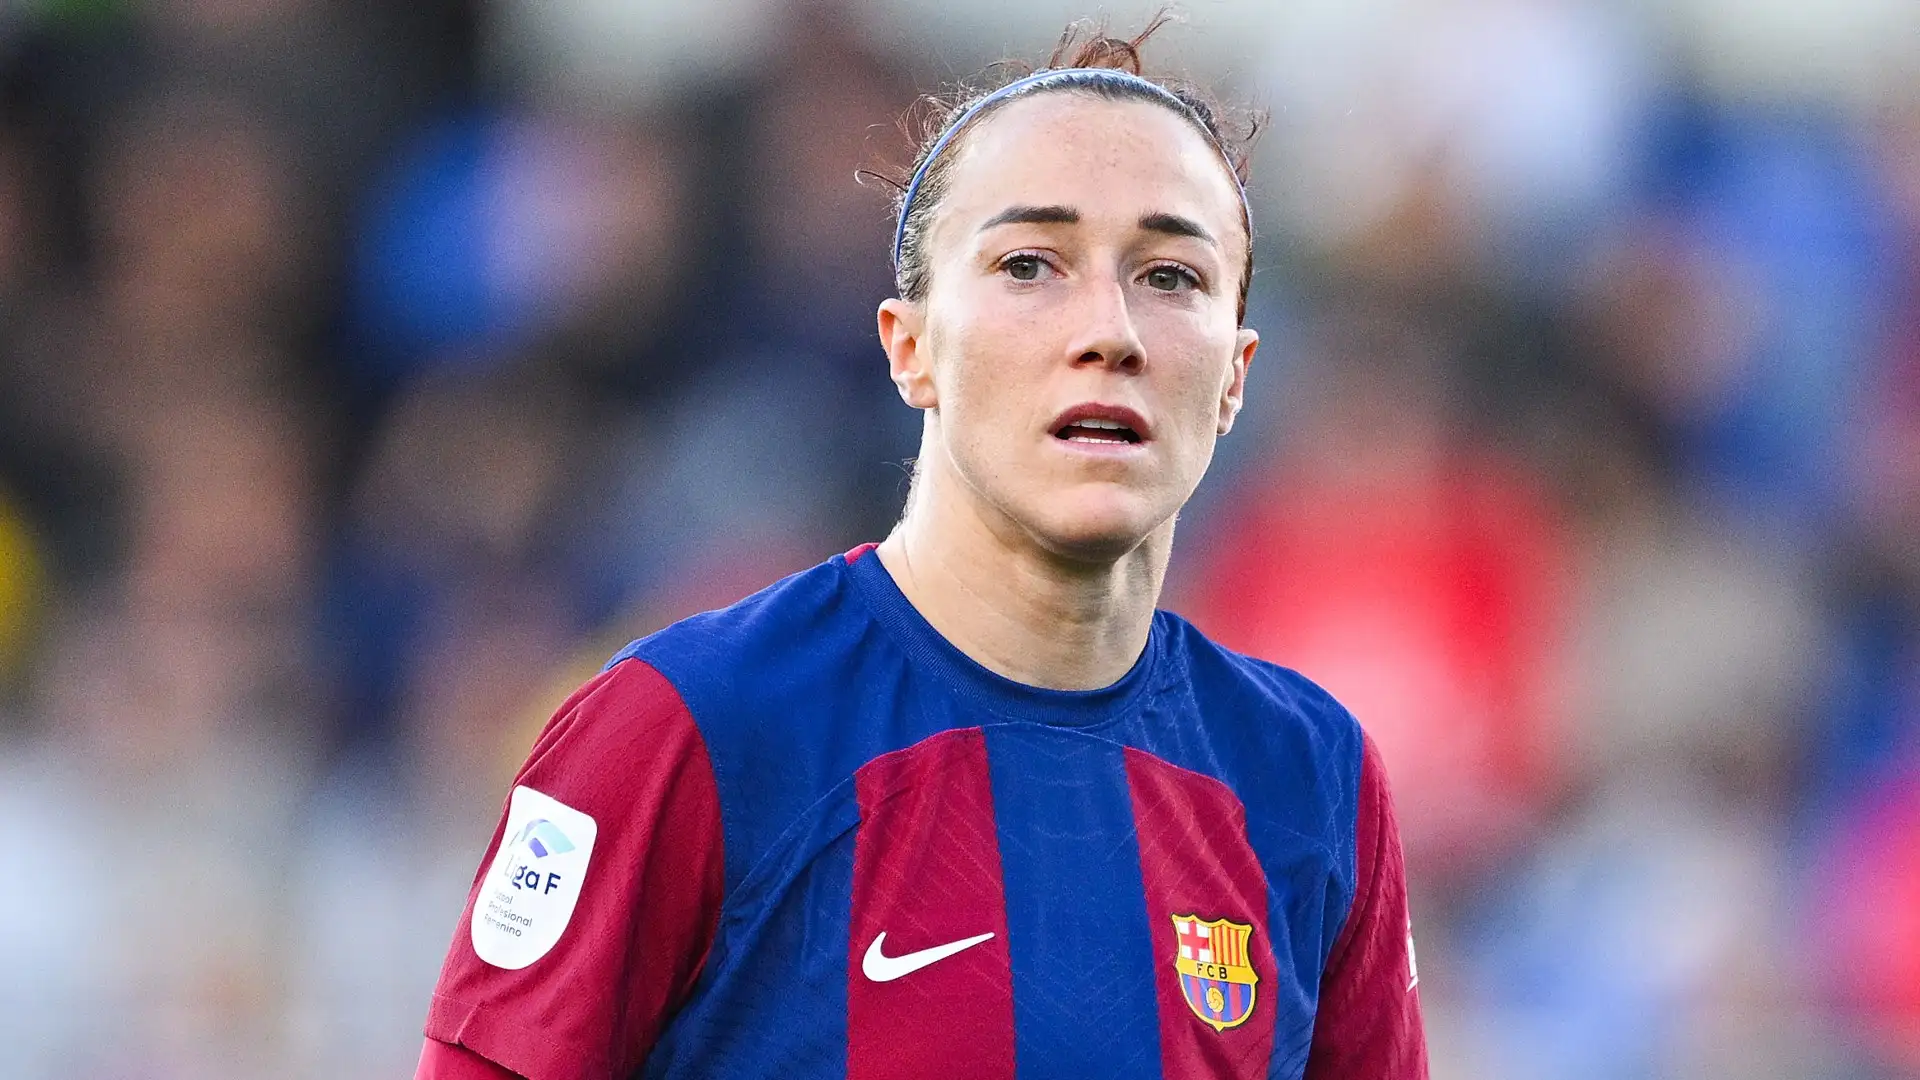 Will Lucy Bronze stay at Barcelona? Lionesses star set to receive ‘better offers’ from abroad amid England and United States rumours – but wants renewal in Catalunya